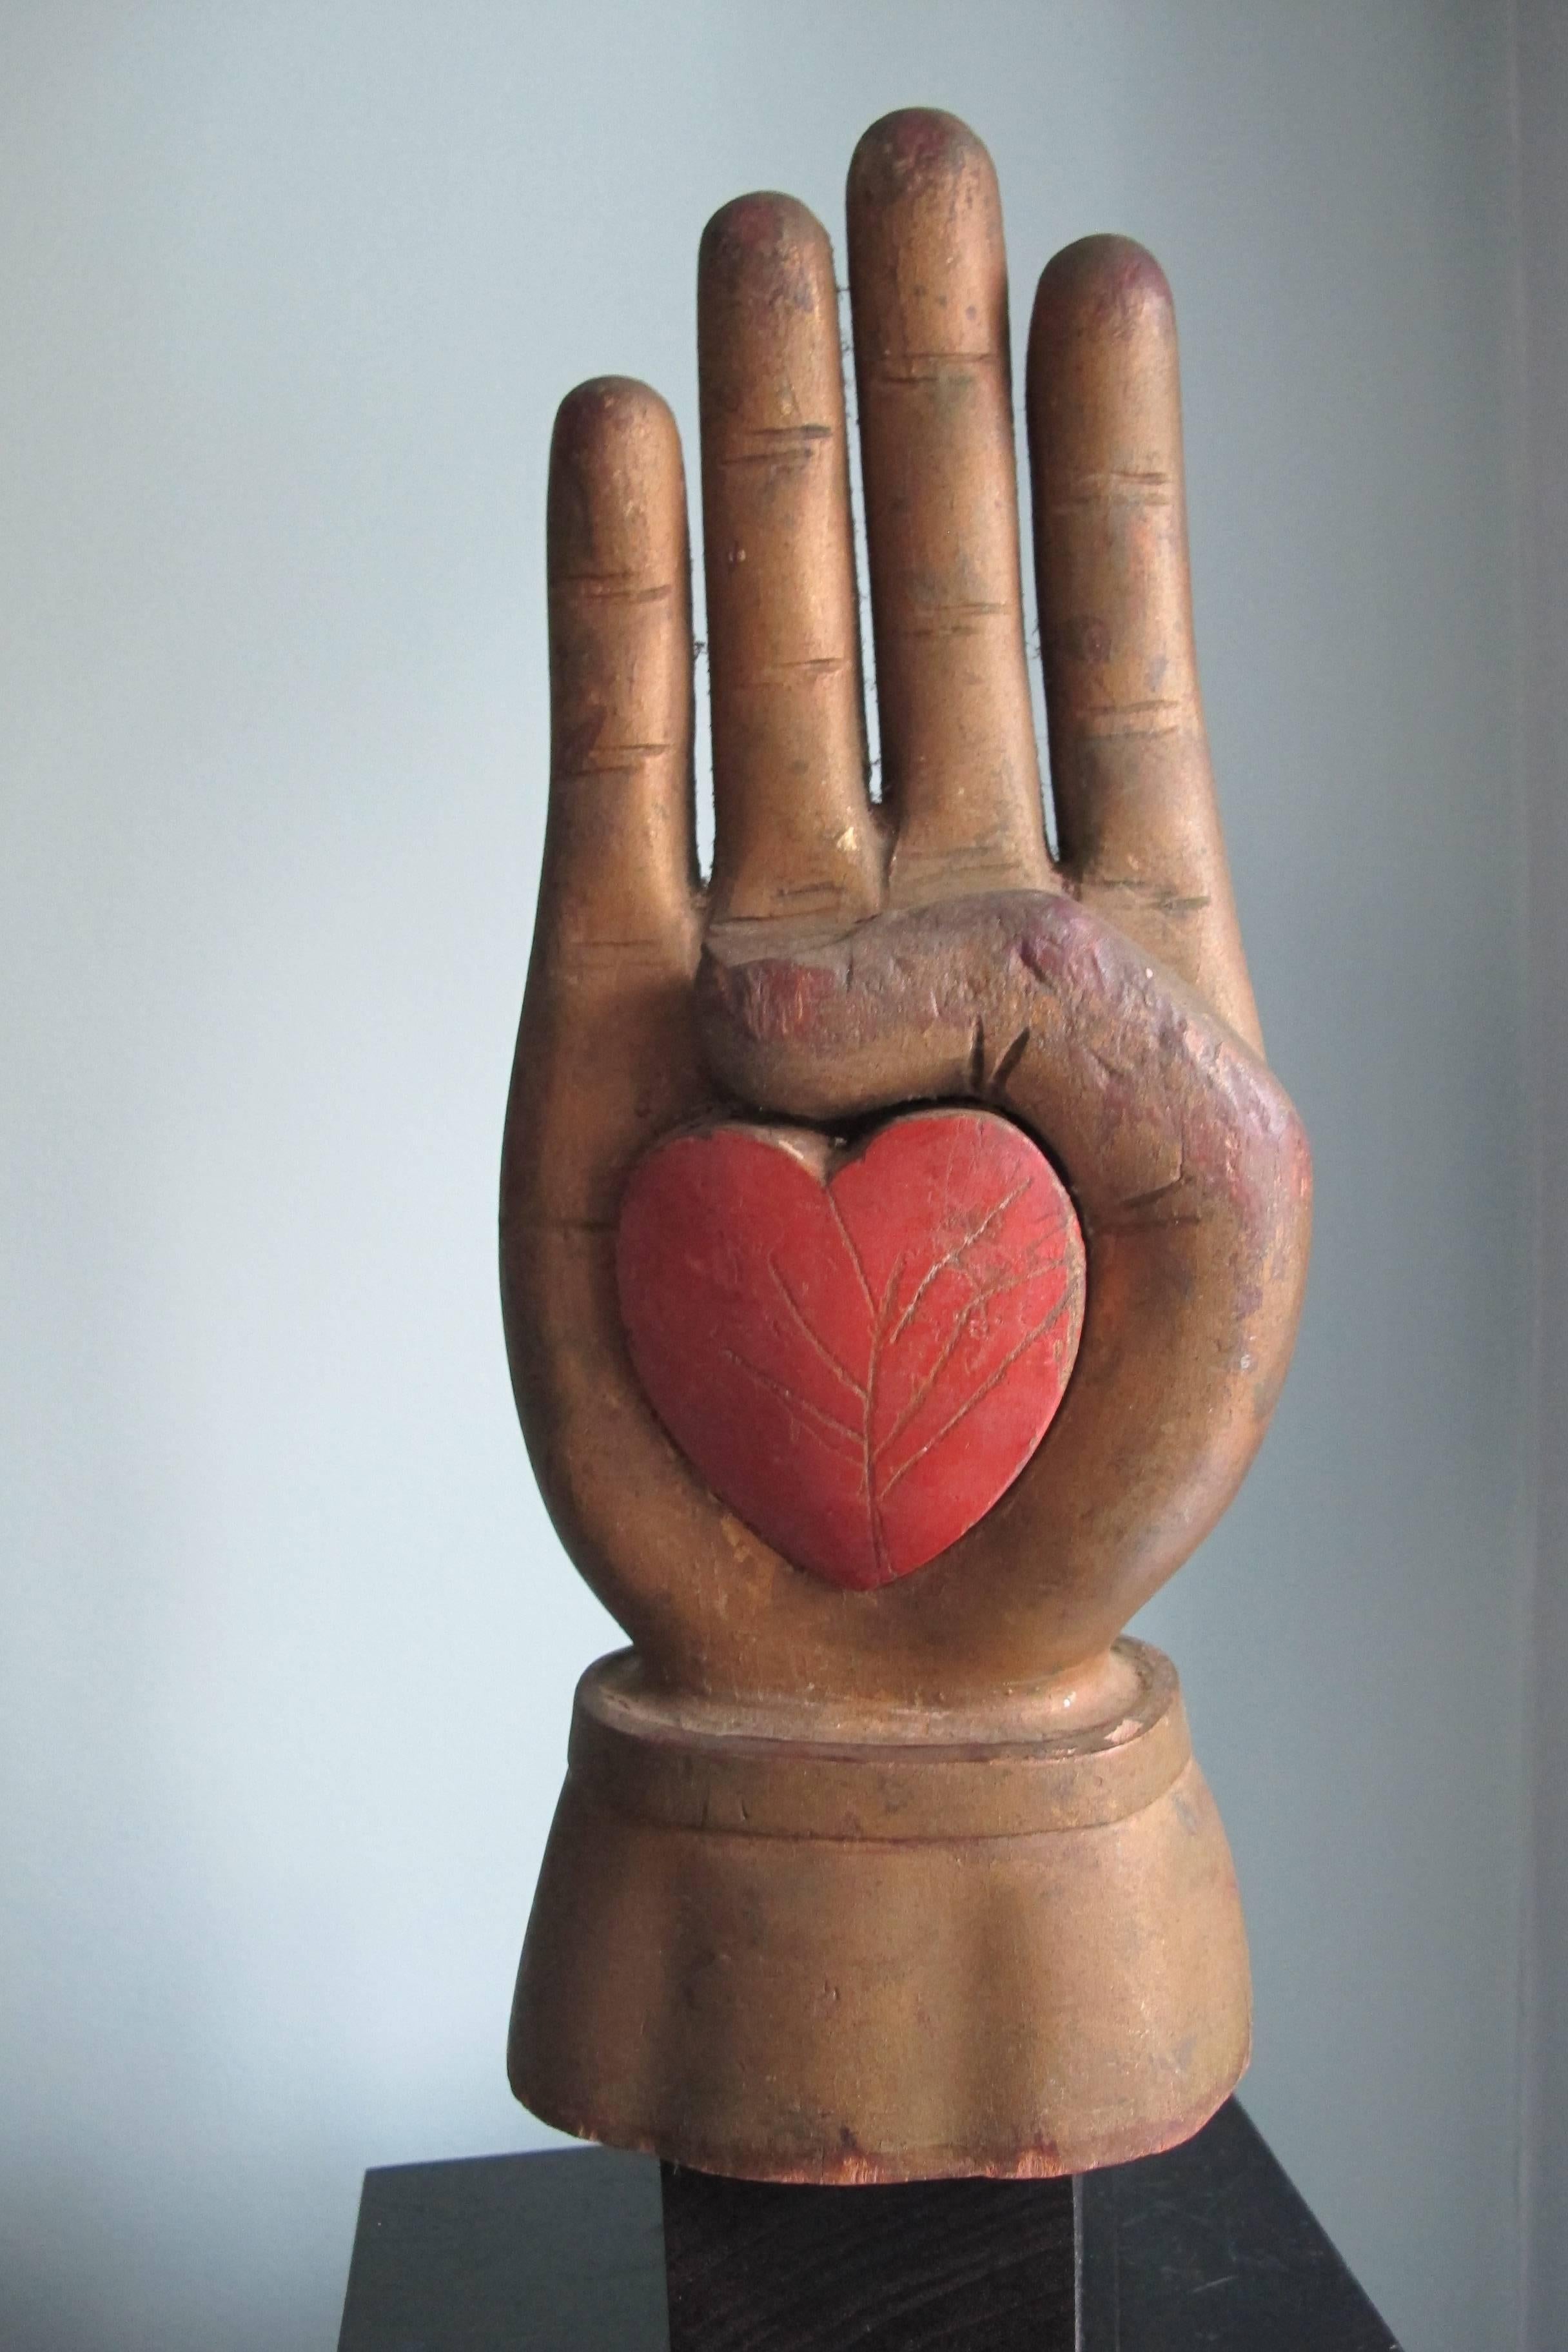 Exceptional painted wood carving in the form of a heart in hand. An iconic symbol of friendship and loving kindness. The fraternal movement was extremely important in early American society and the international order of odd fellows was popular in